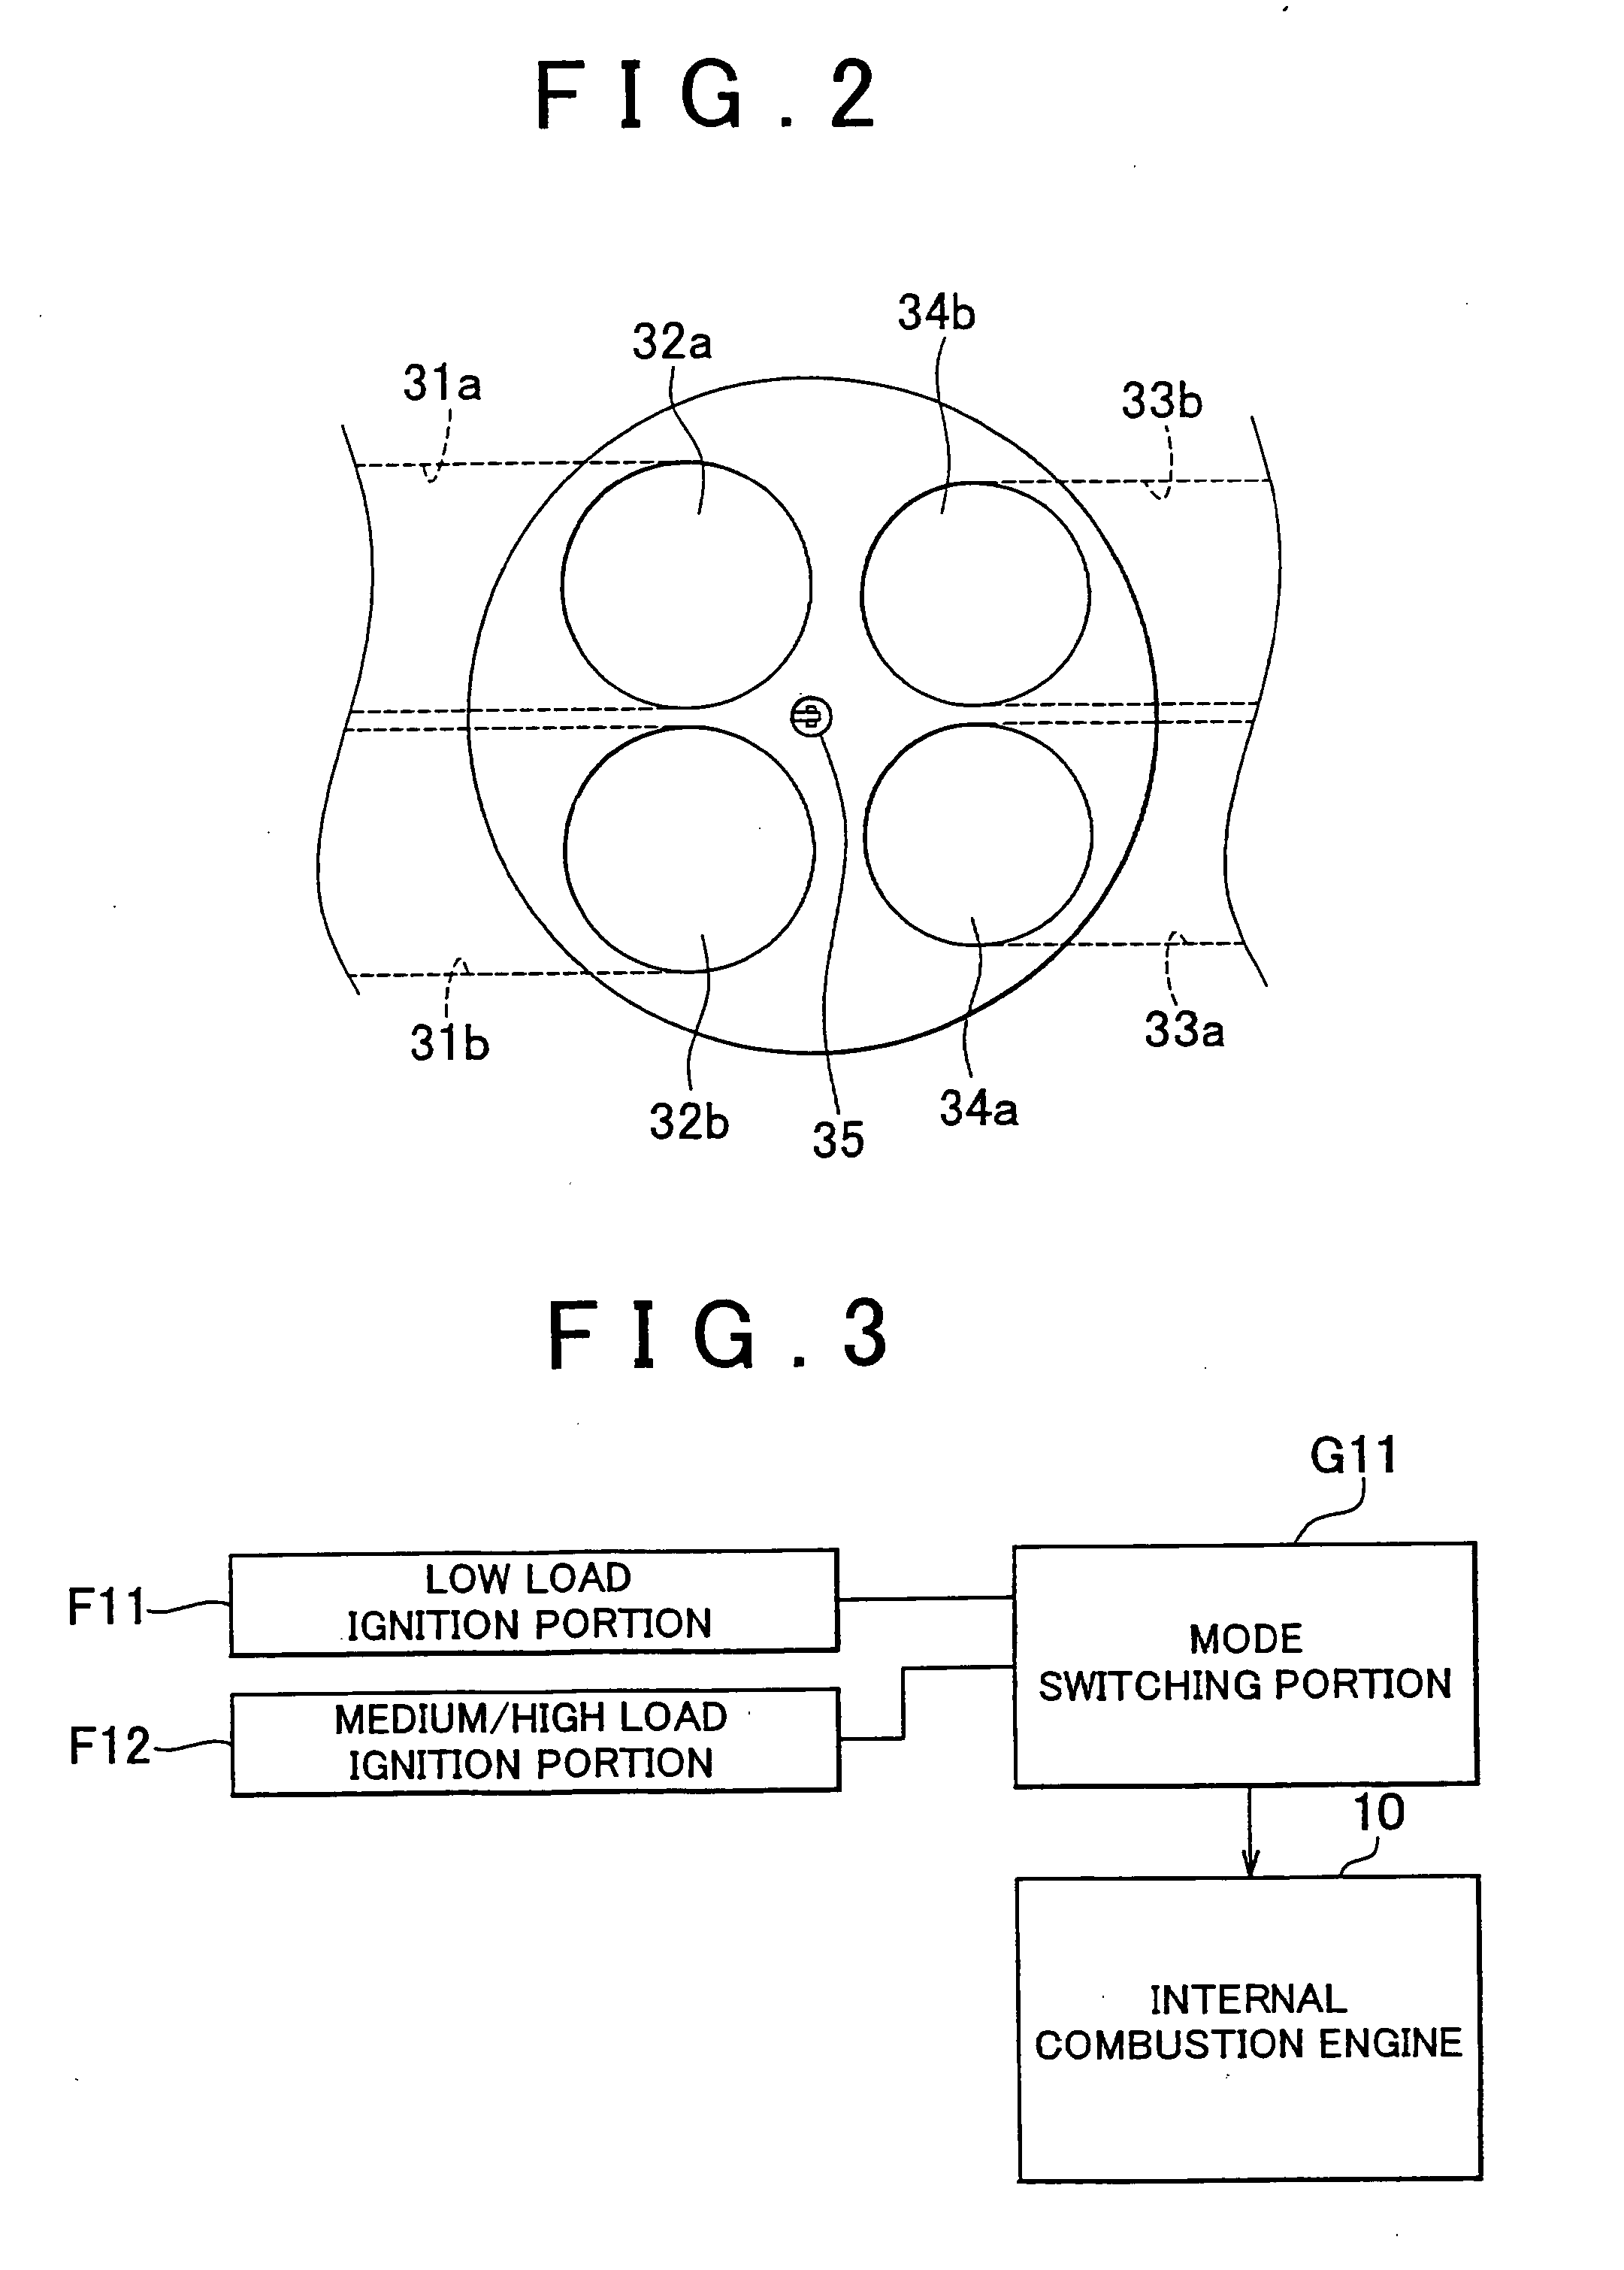 Control apparatus and method for four-stroke premixed compression ignition internal combustion engine